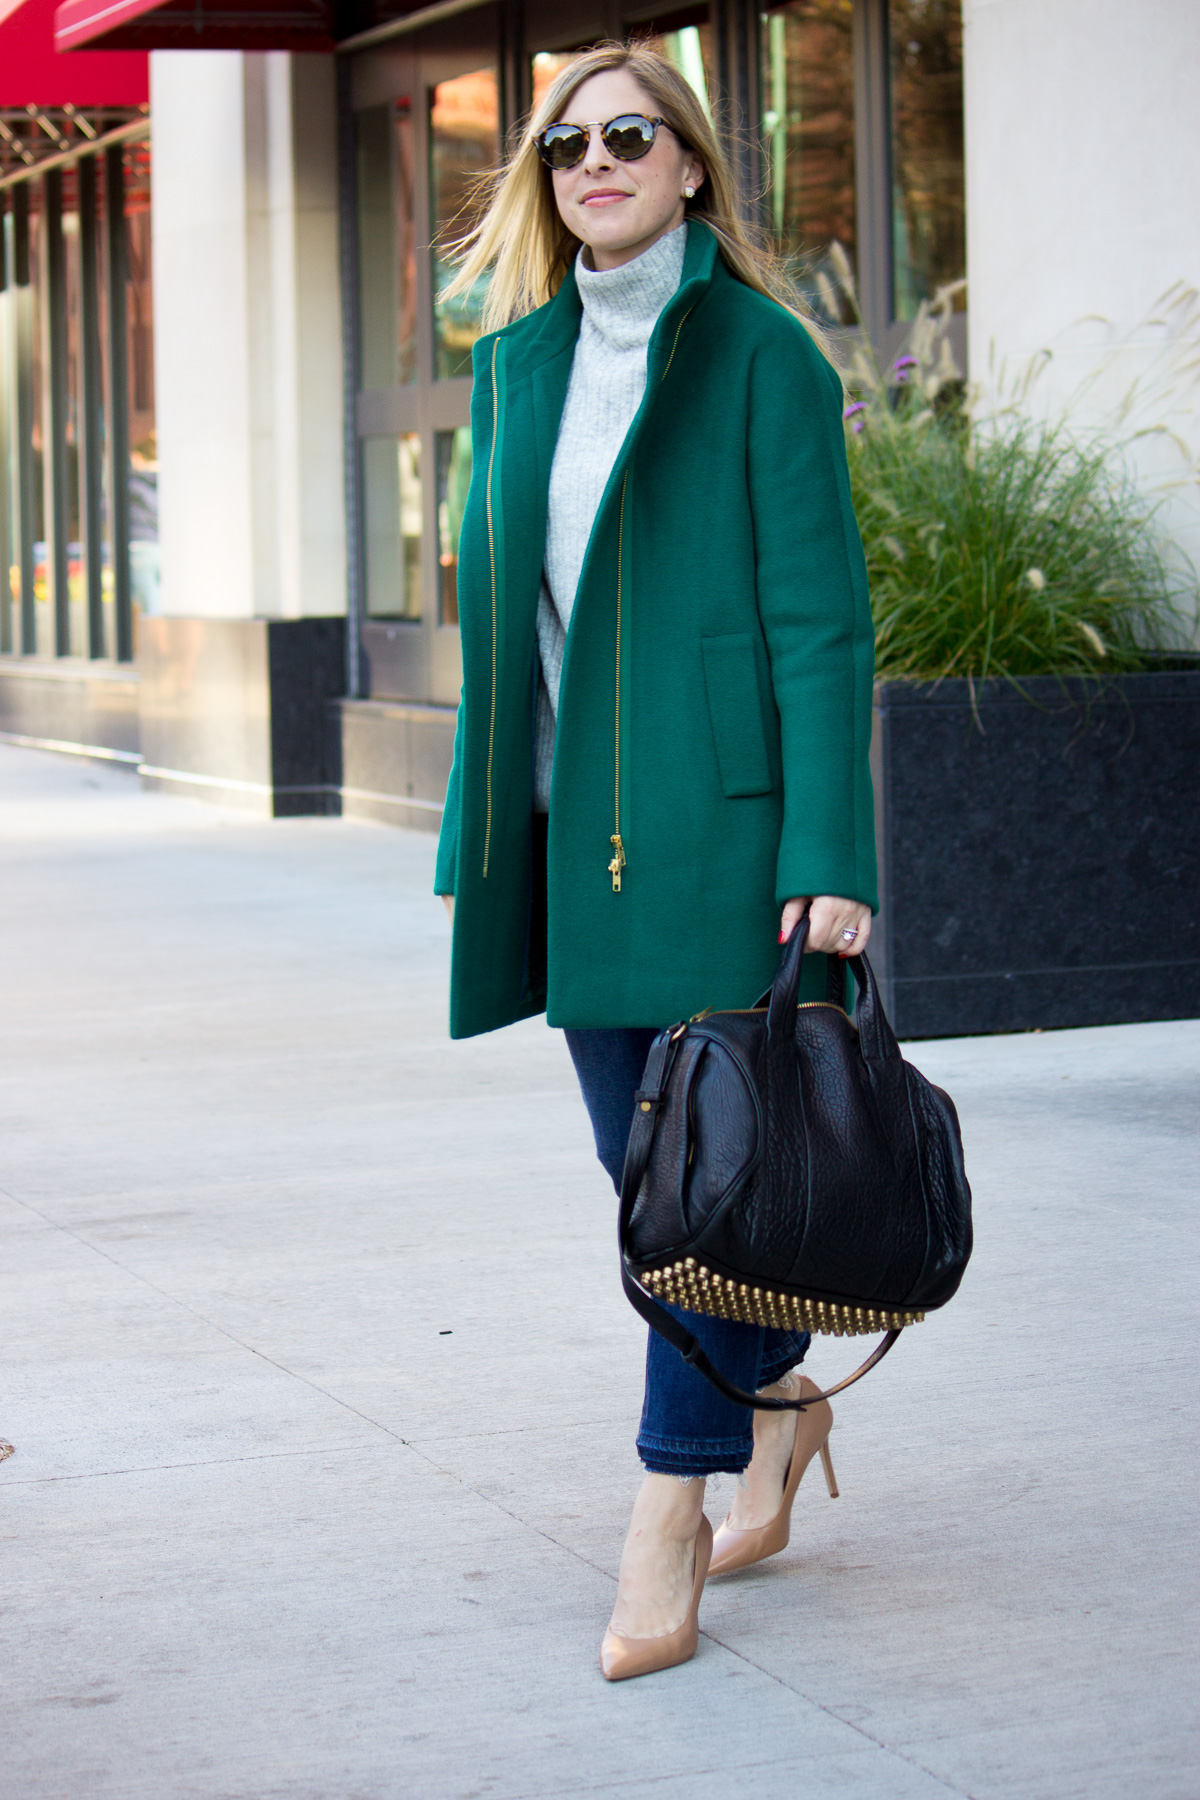 Colorful Coat for Fall